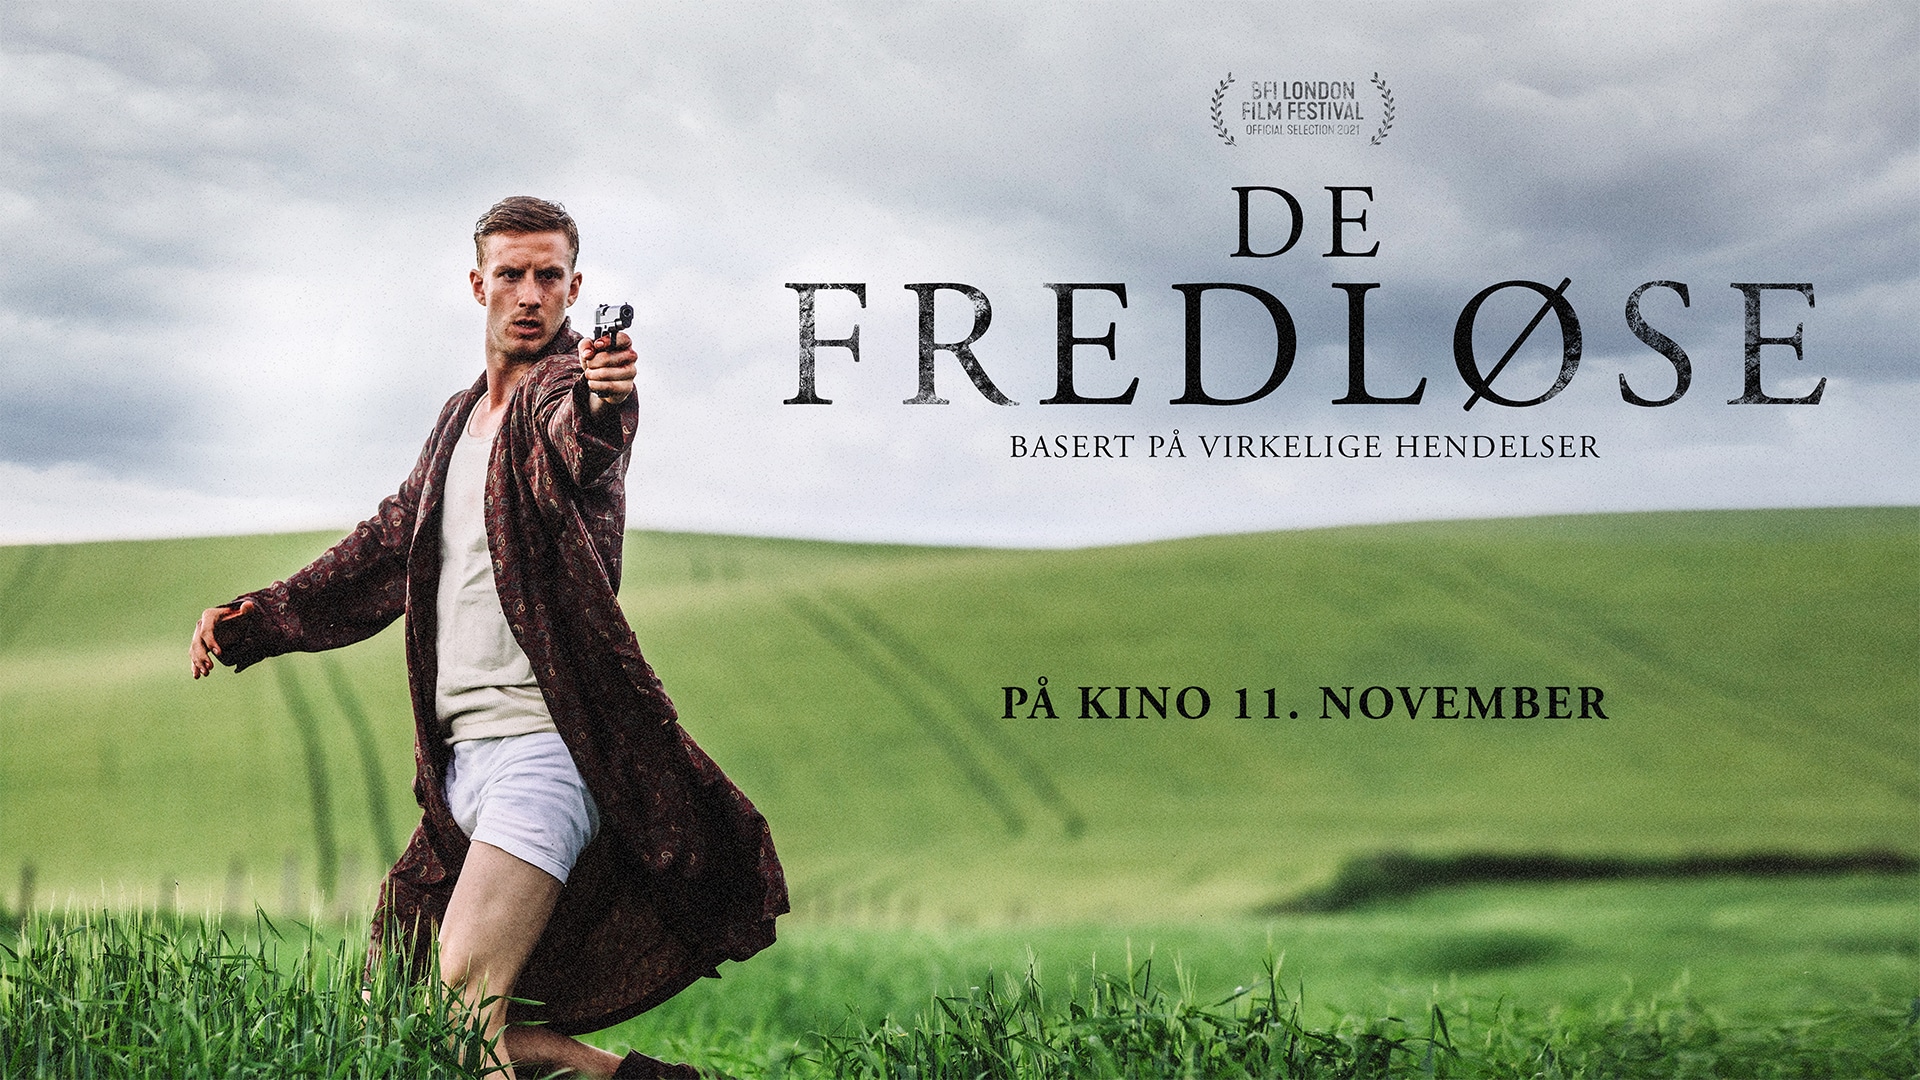 A man pointing a gun wearing a robe on the promotional poster for movie De Fredløse.